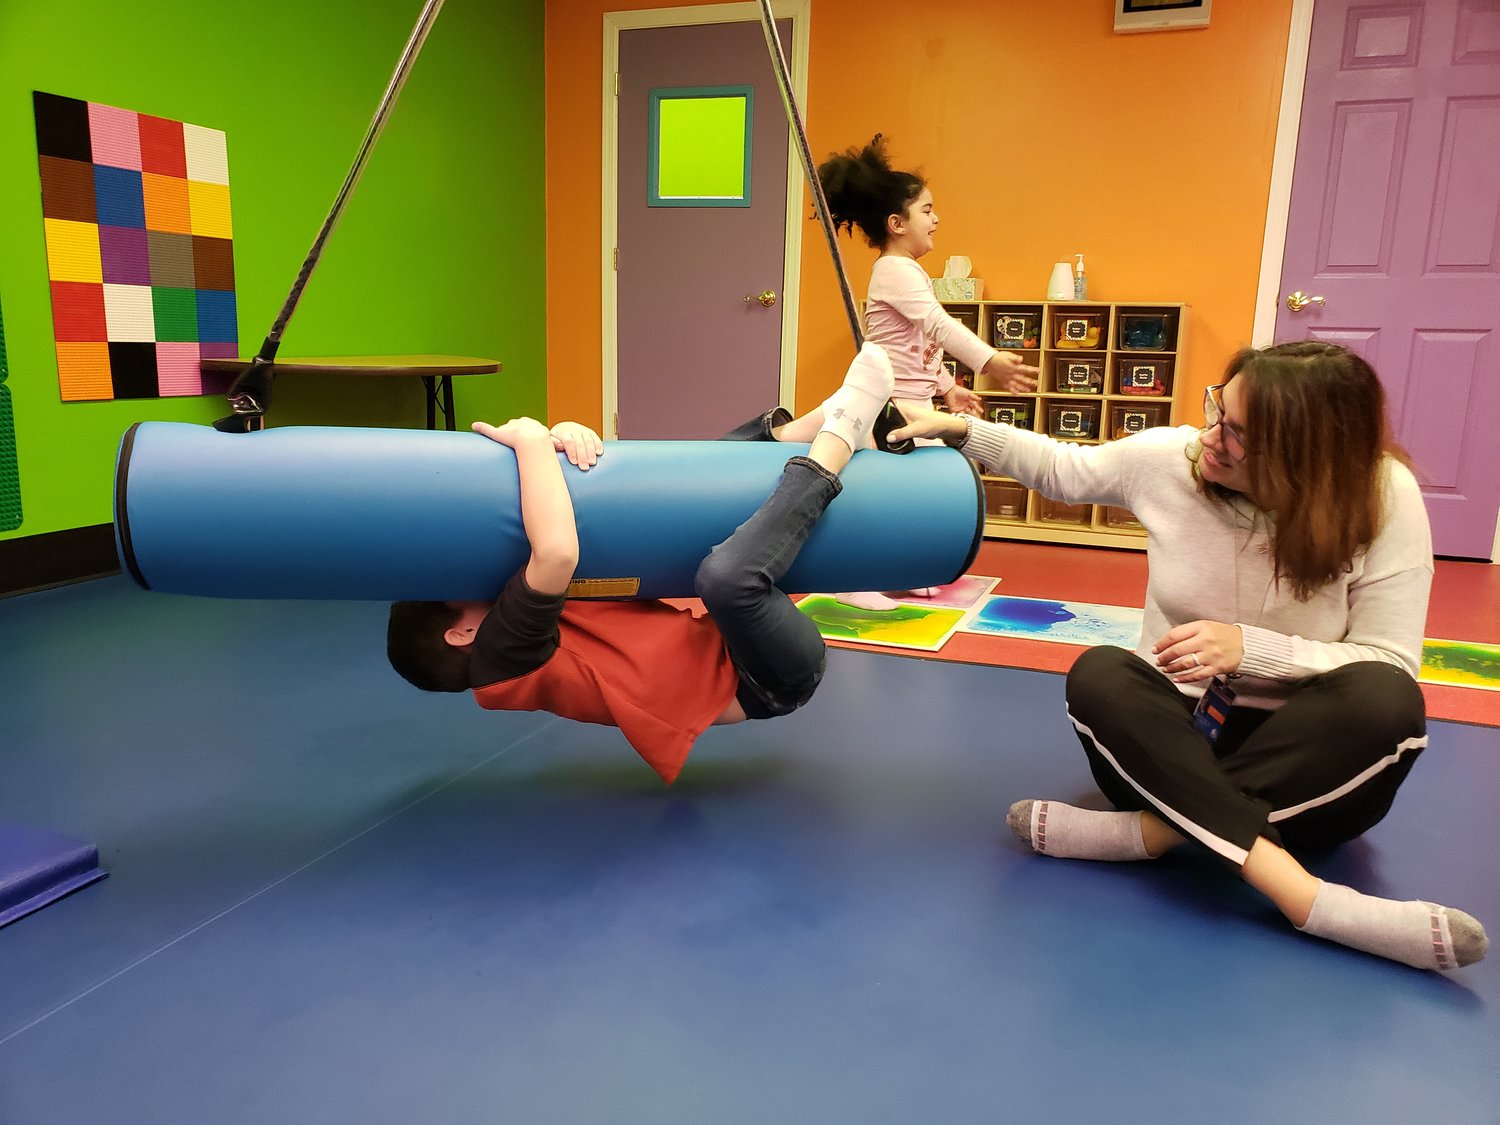 Declan Cunningham, 8, held tight on the bolster swing as Michele Floria, the school’s occupational therapist, pushed him back and forth.